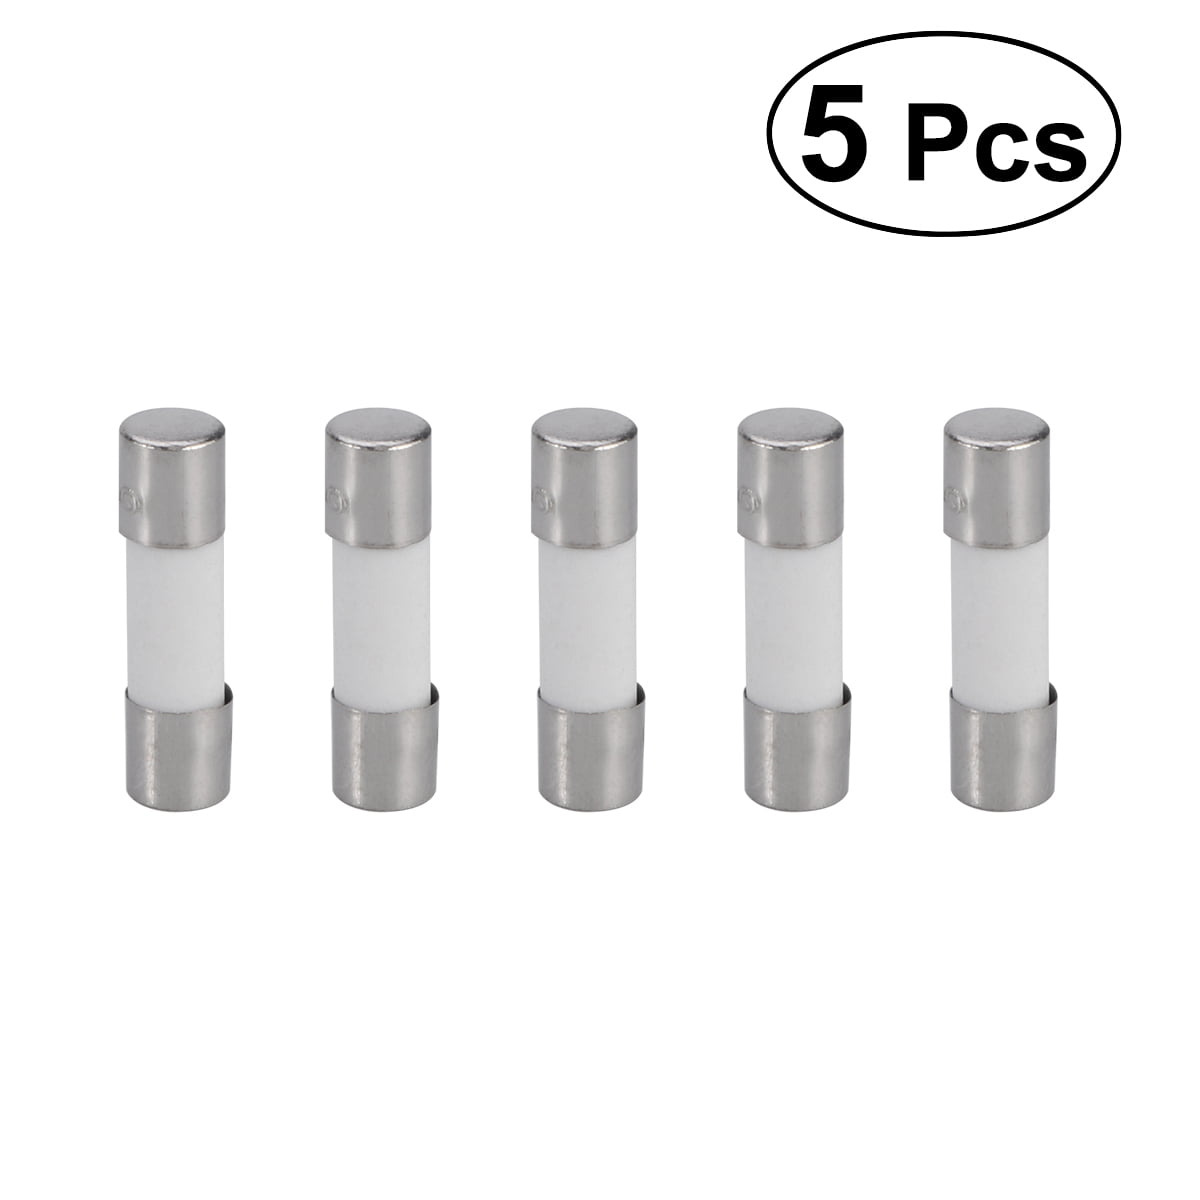 5x BUSS/BELFUSE USA brand 3A 250V Fast Quick Blow Glass Fuse 5x20mm GMA 3A 